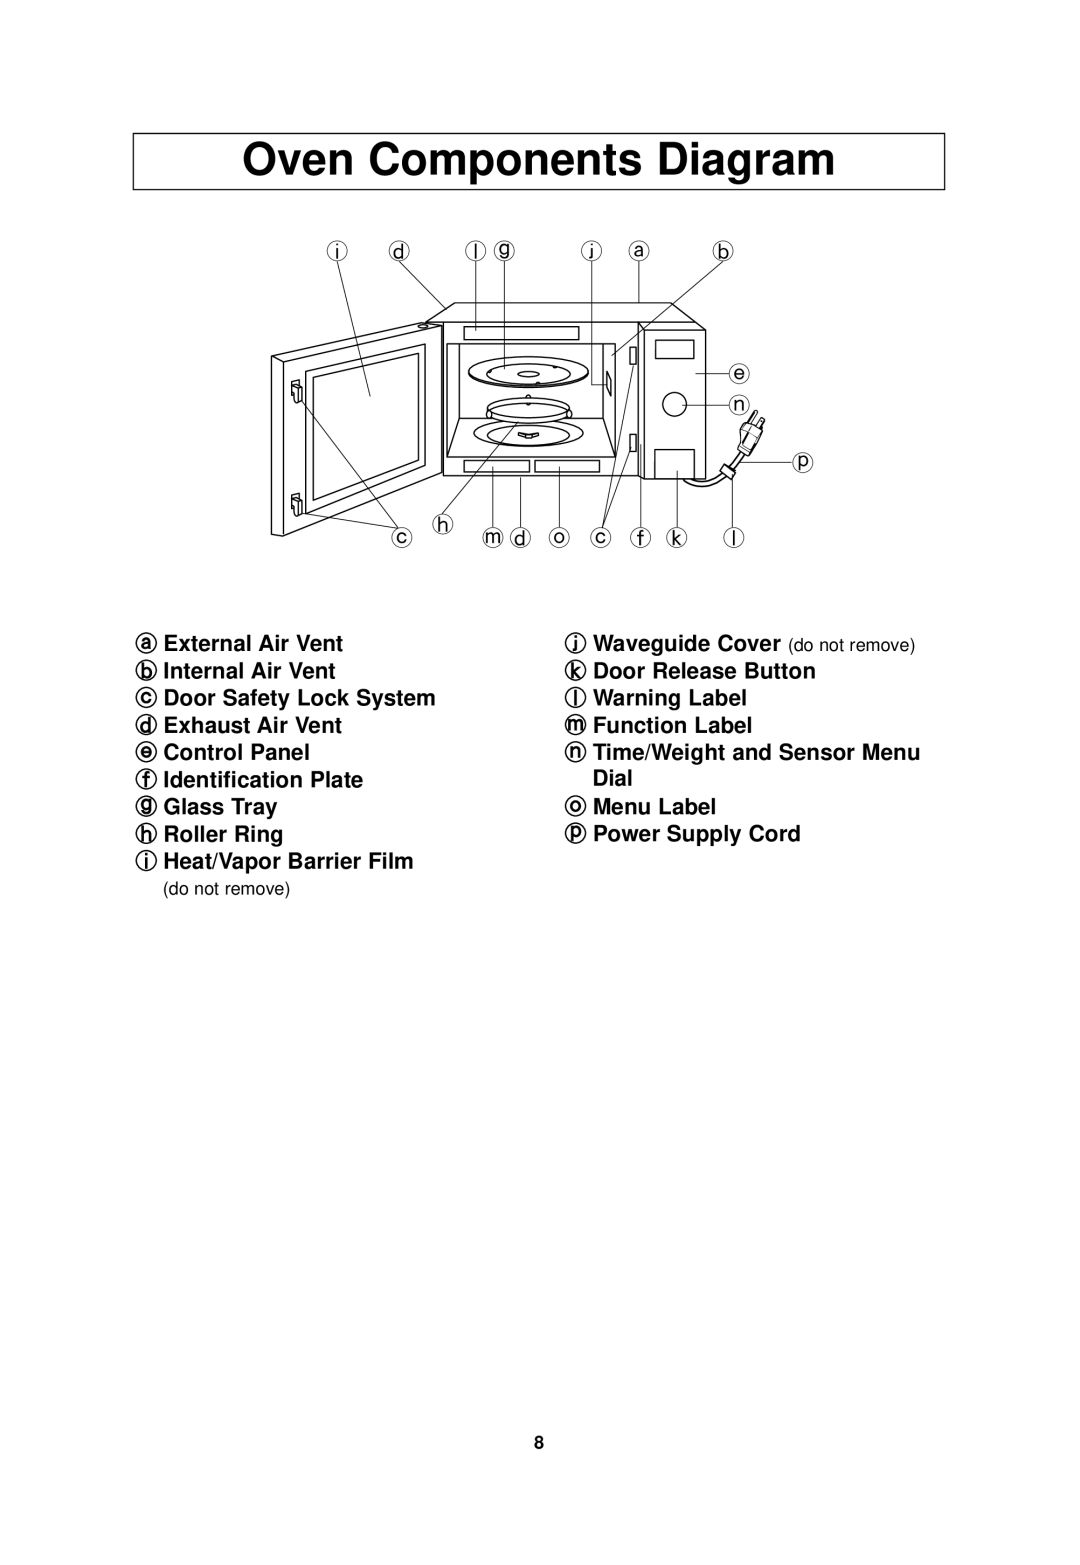 Panasonic NN-SD978, NN-SD778 important safety instructions Oven Components Diagram 